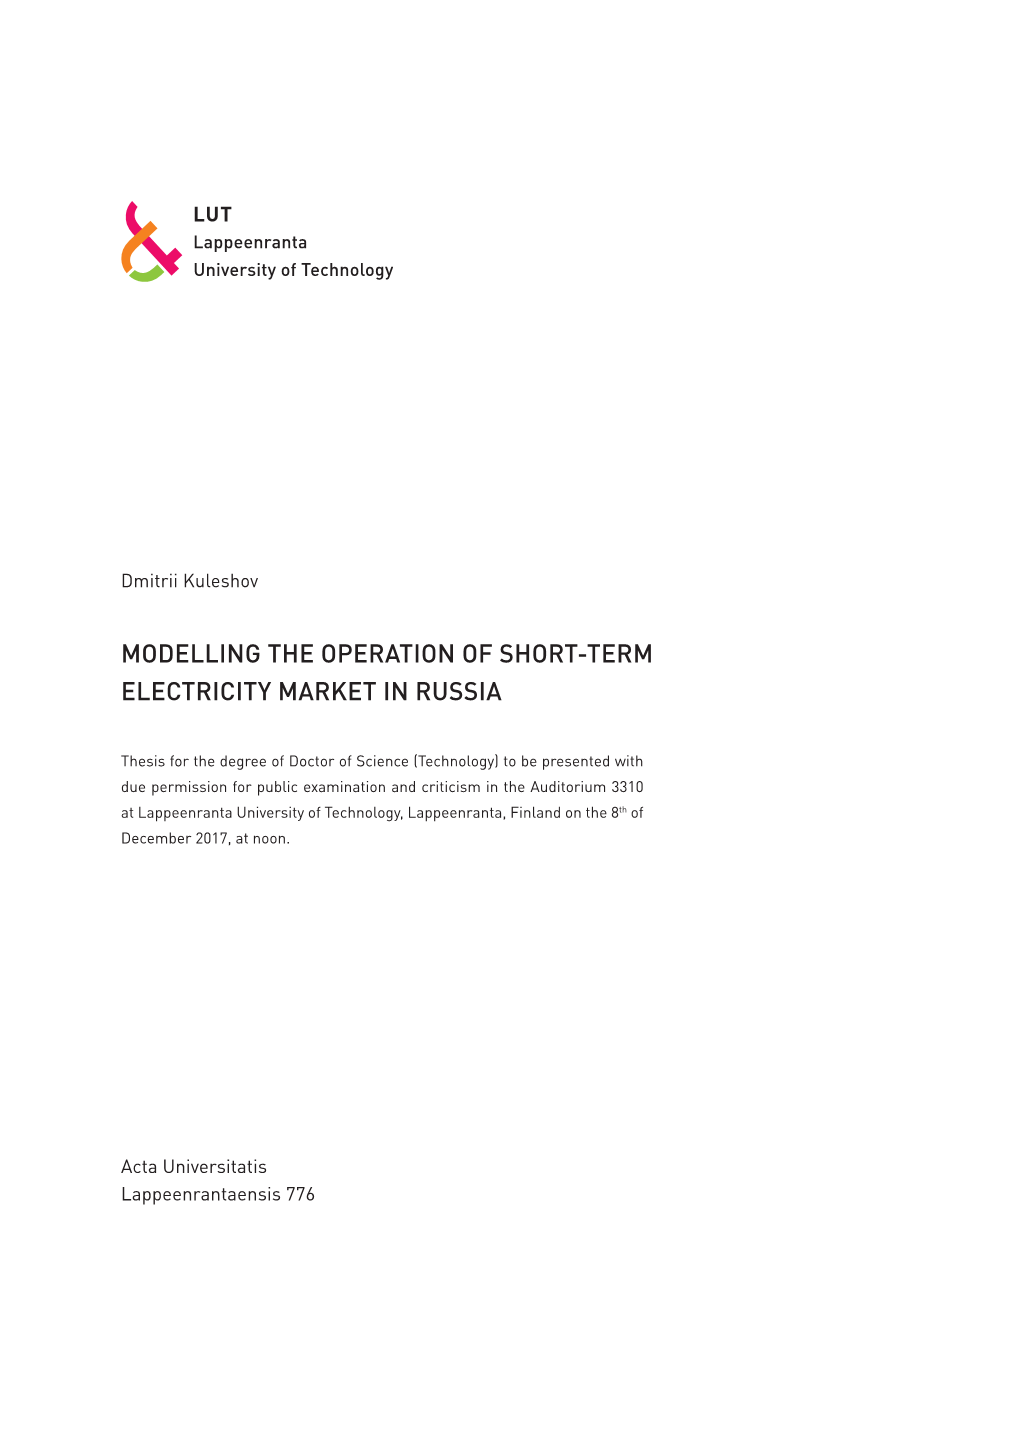 Modelling the Operation of Short-Term Electricity Market in Russia